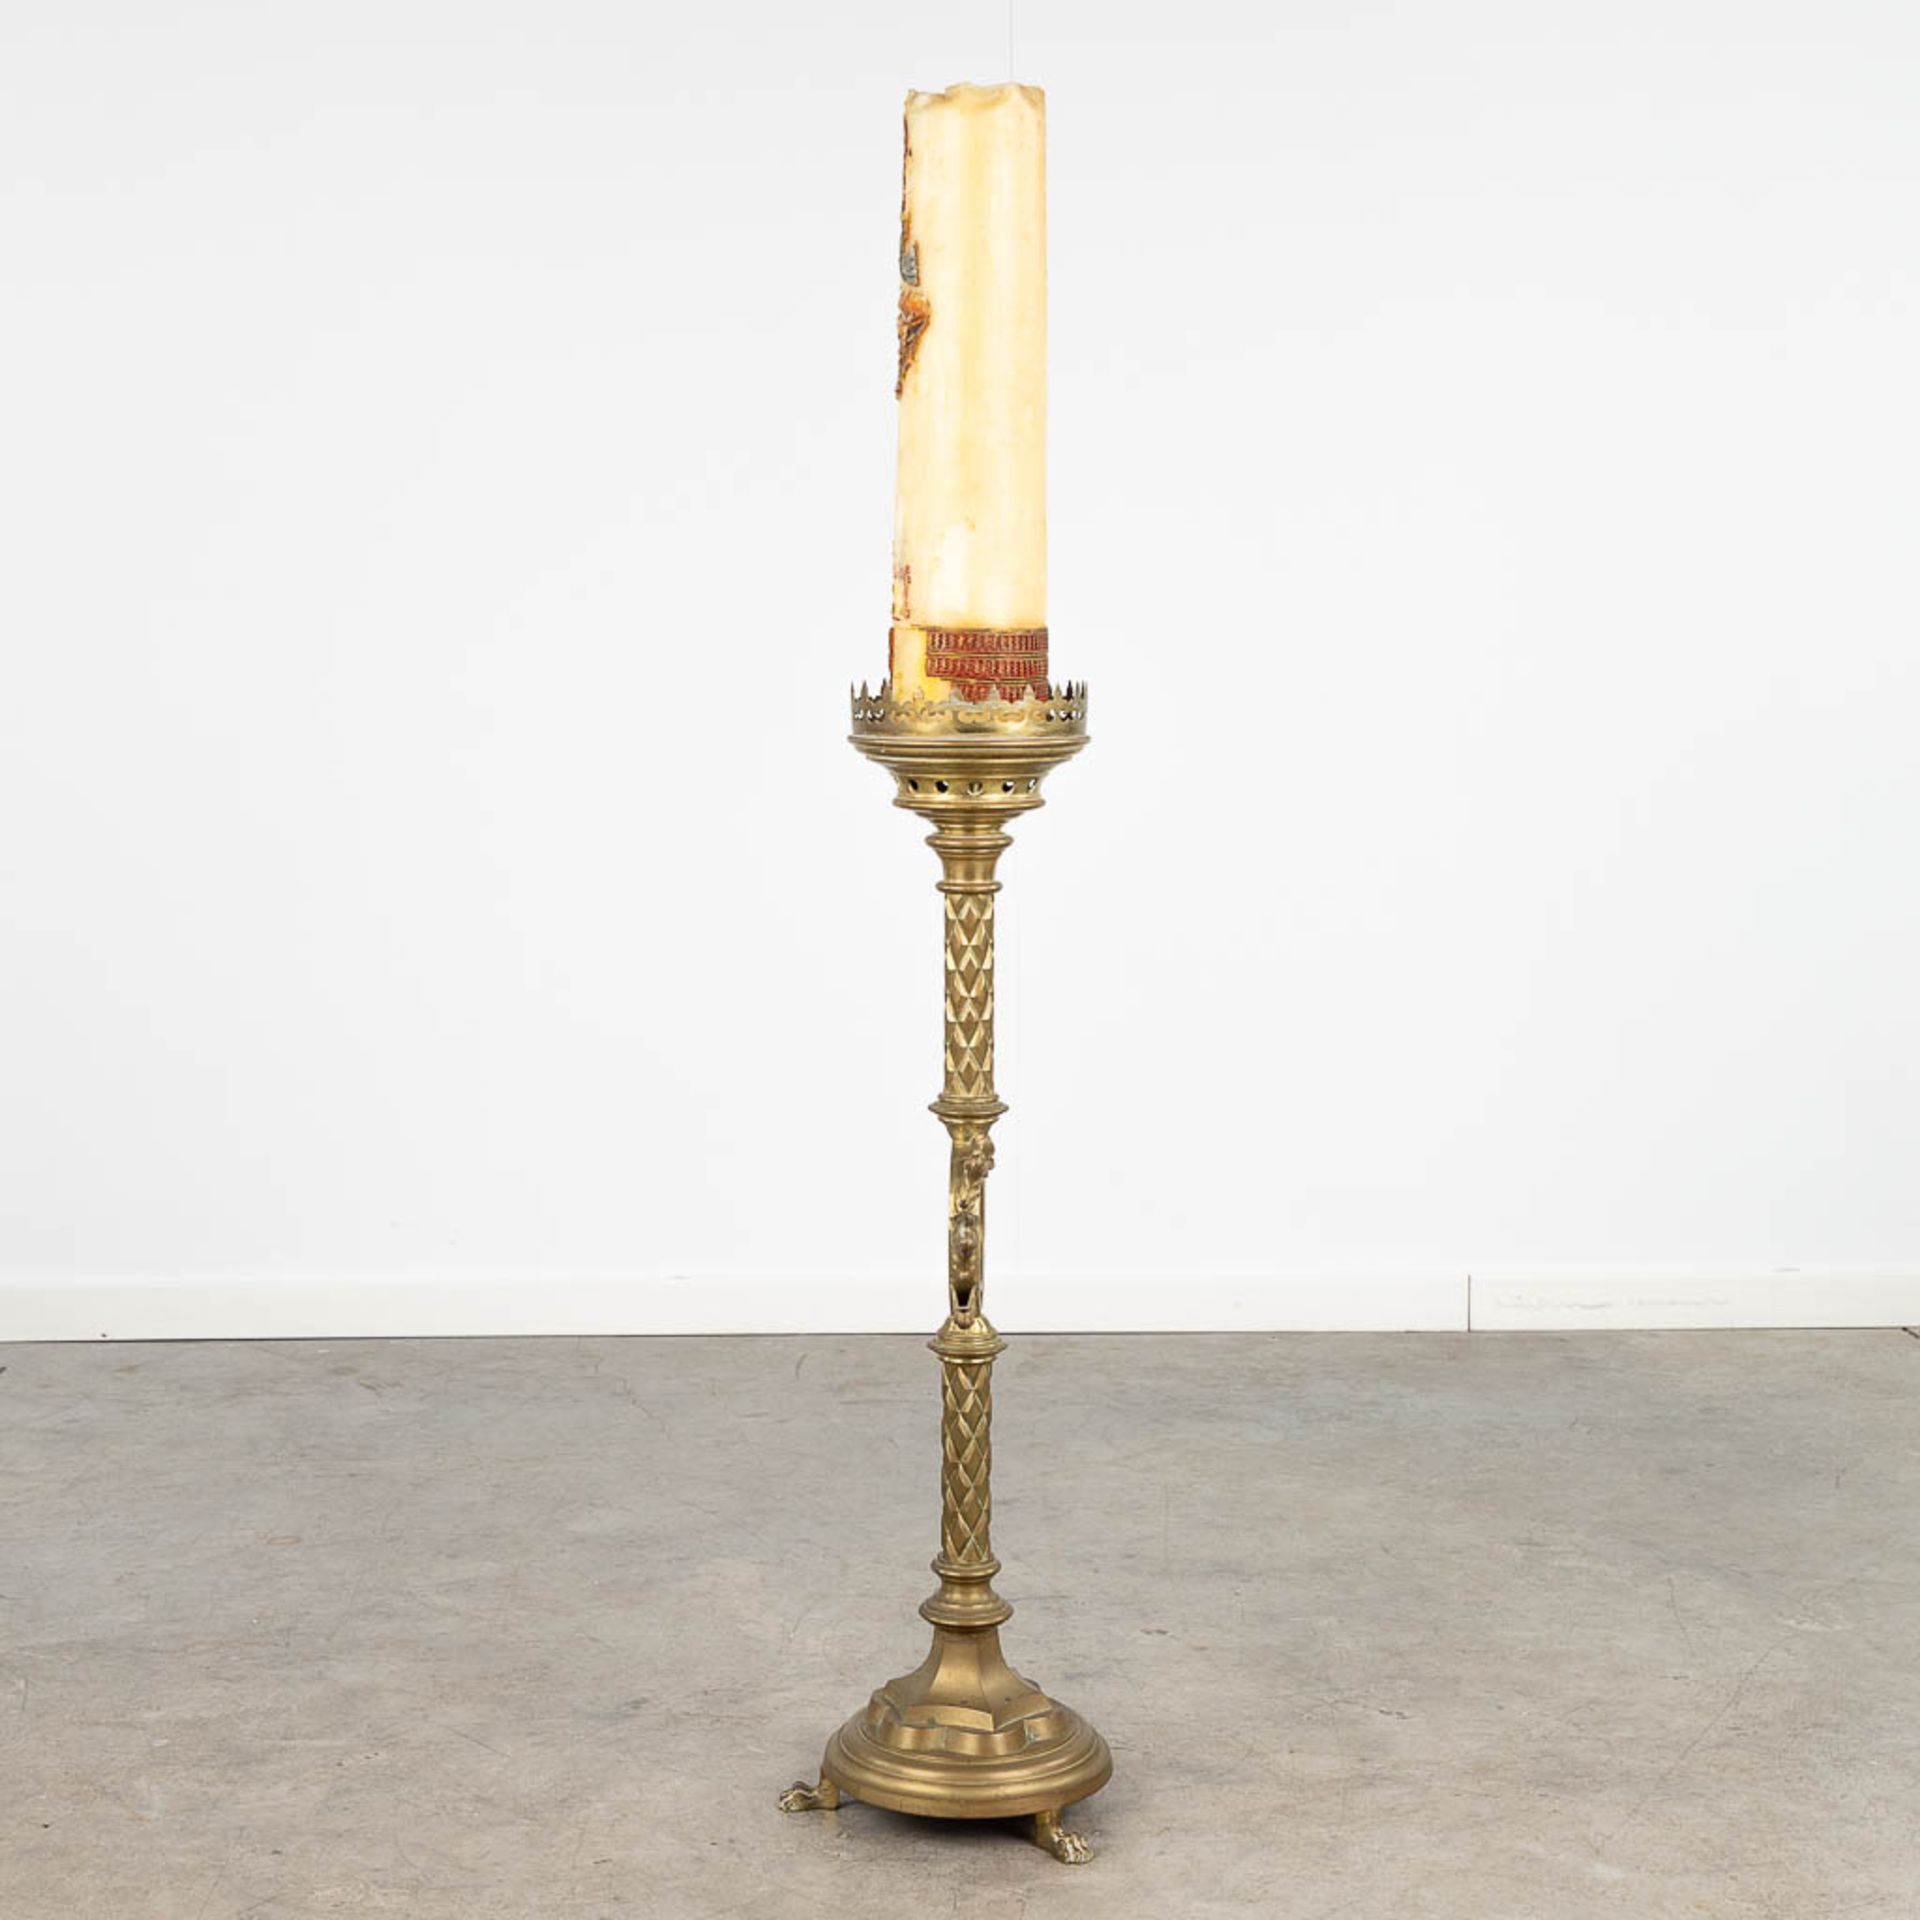 A large candlestick made of bronze, decorated with IHS logo. Gothic Revival style. (H: 92 cm) - Image 5 of 10